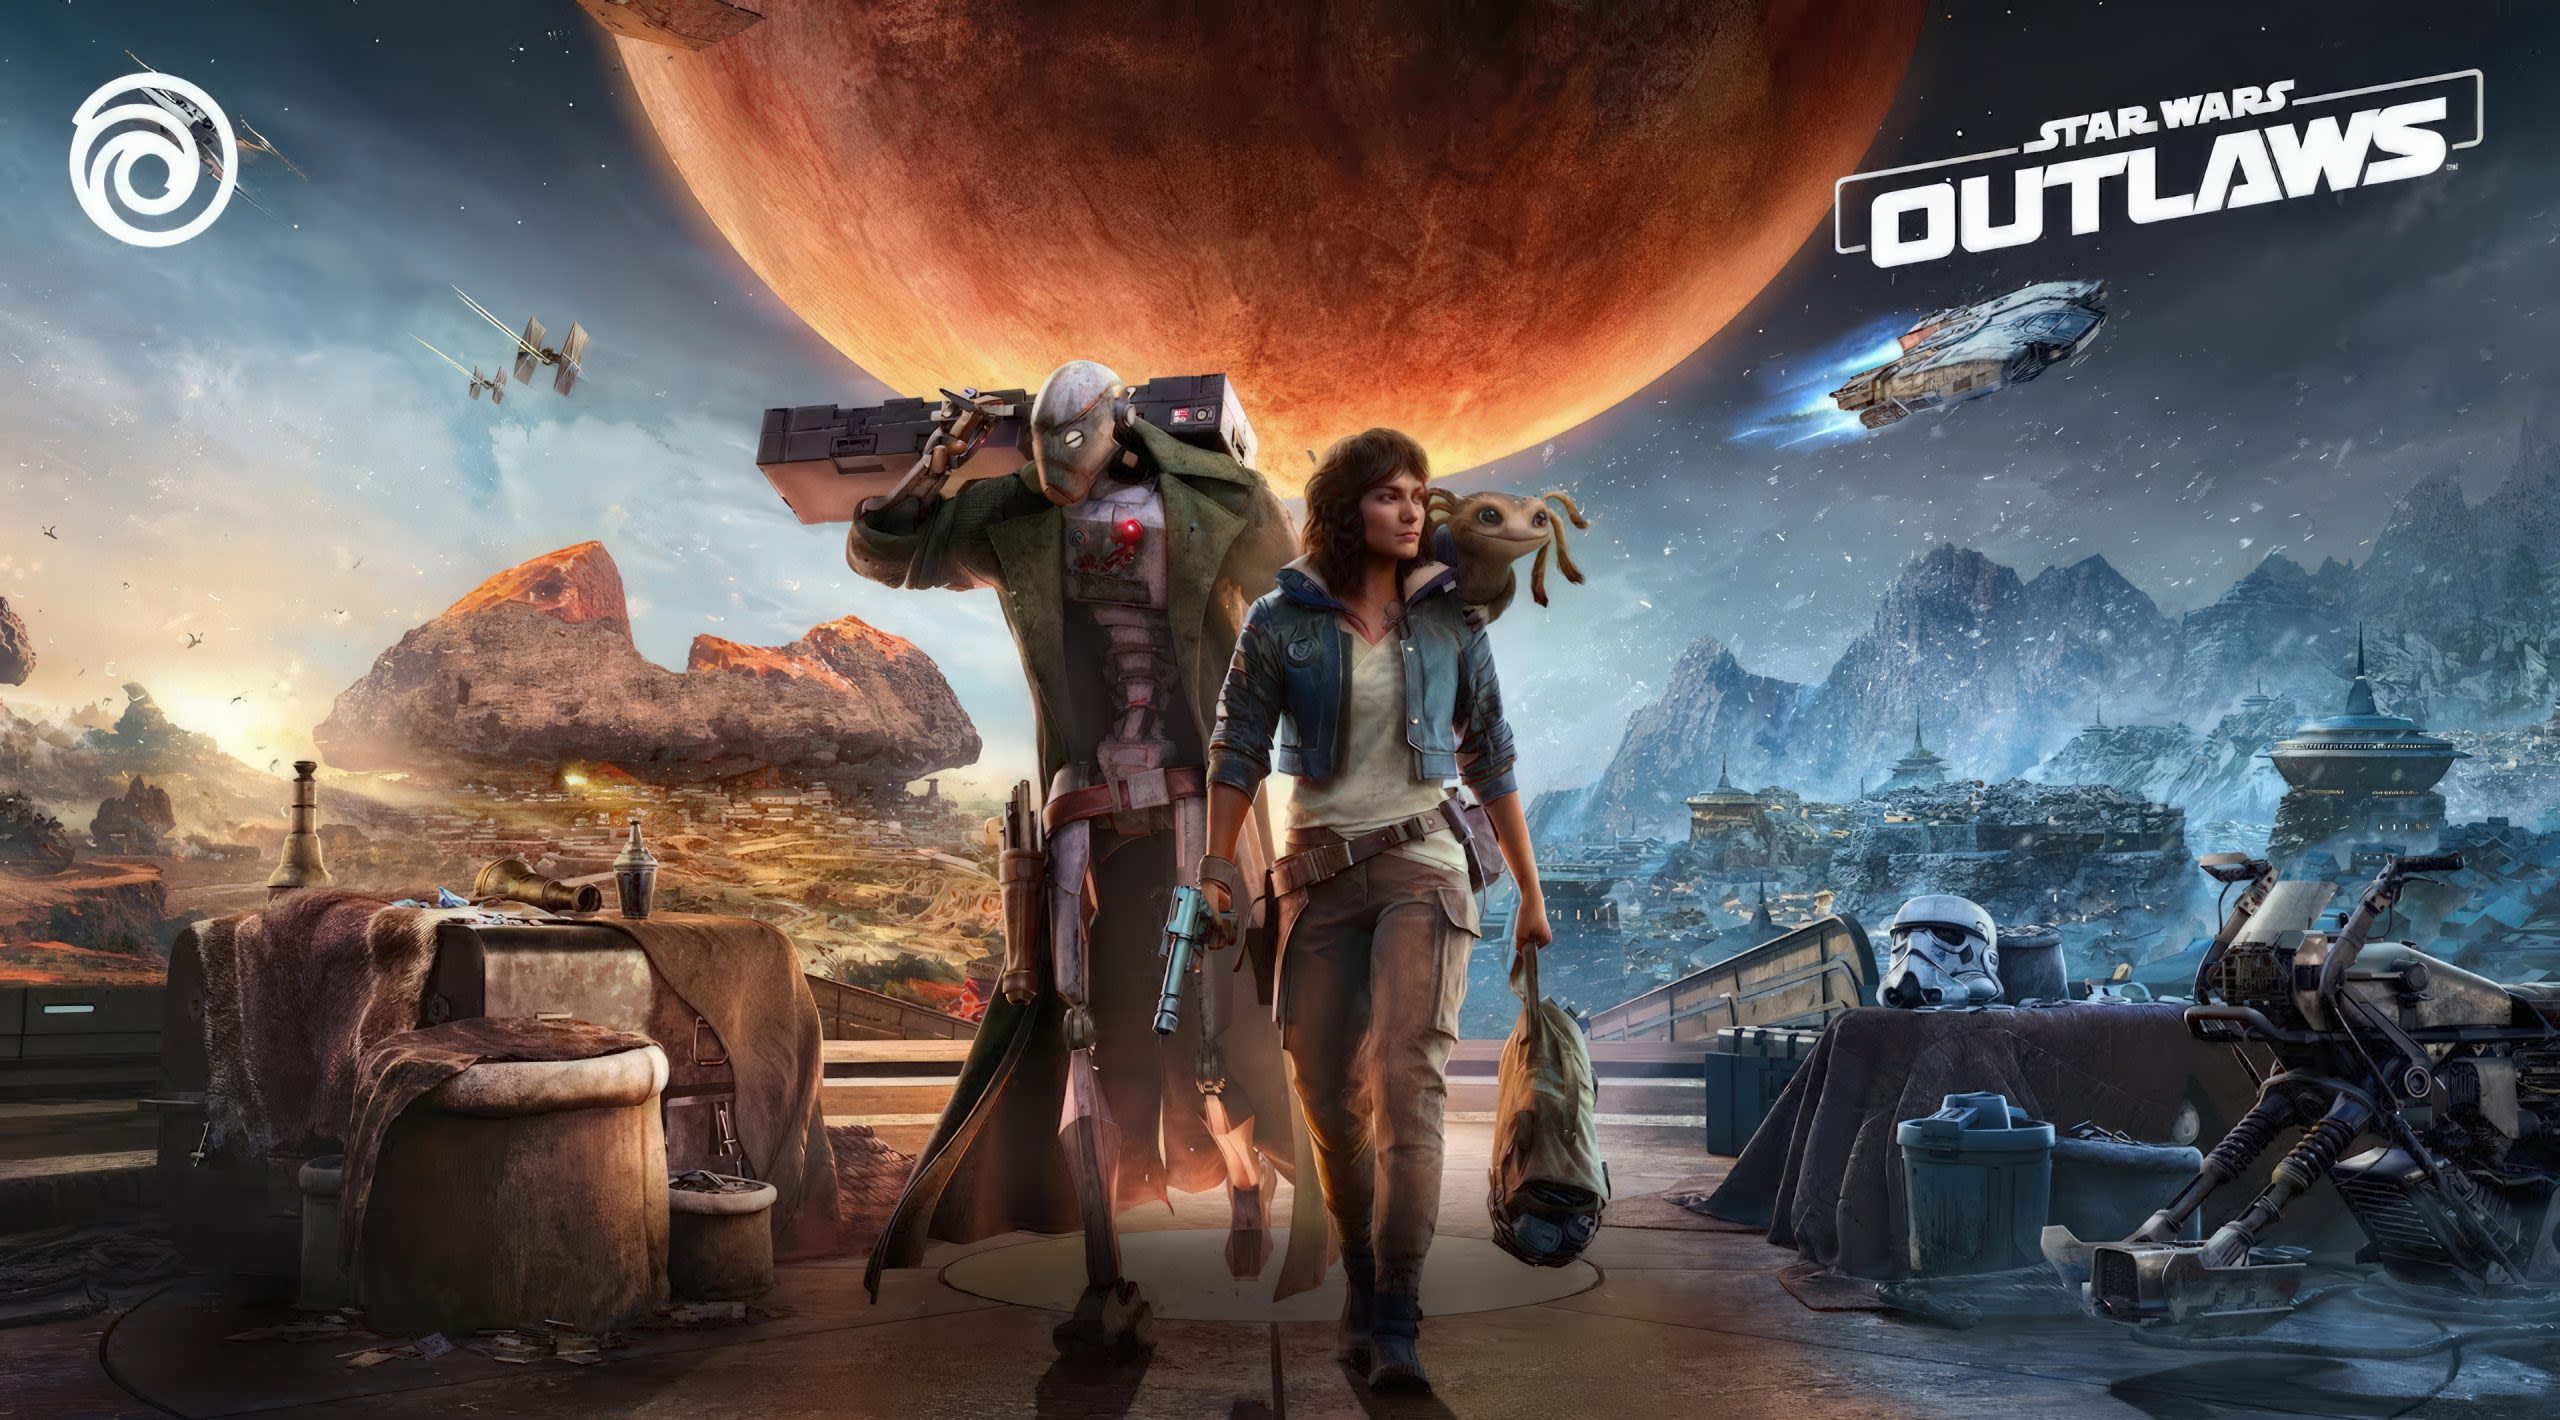 Star Wars Outlaws Goes Gold Nearly 2 Months Ahead of Launch